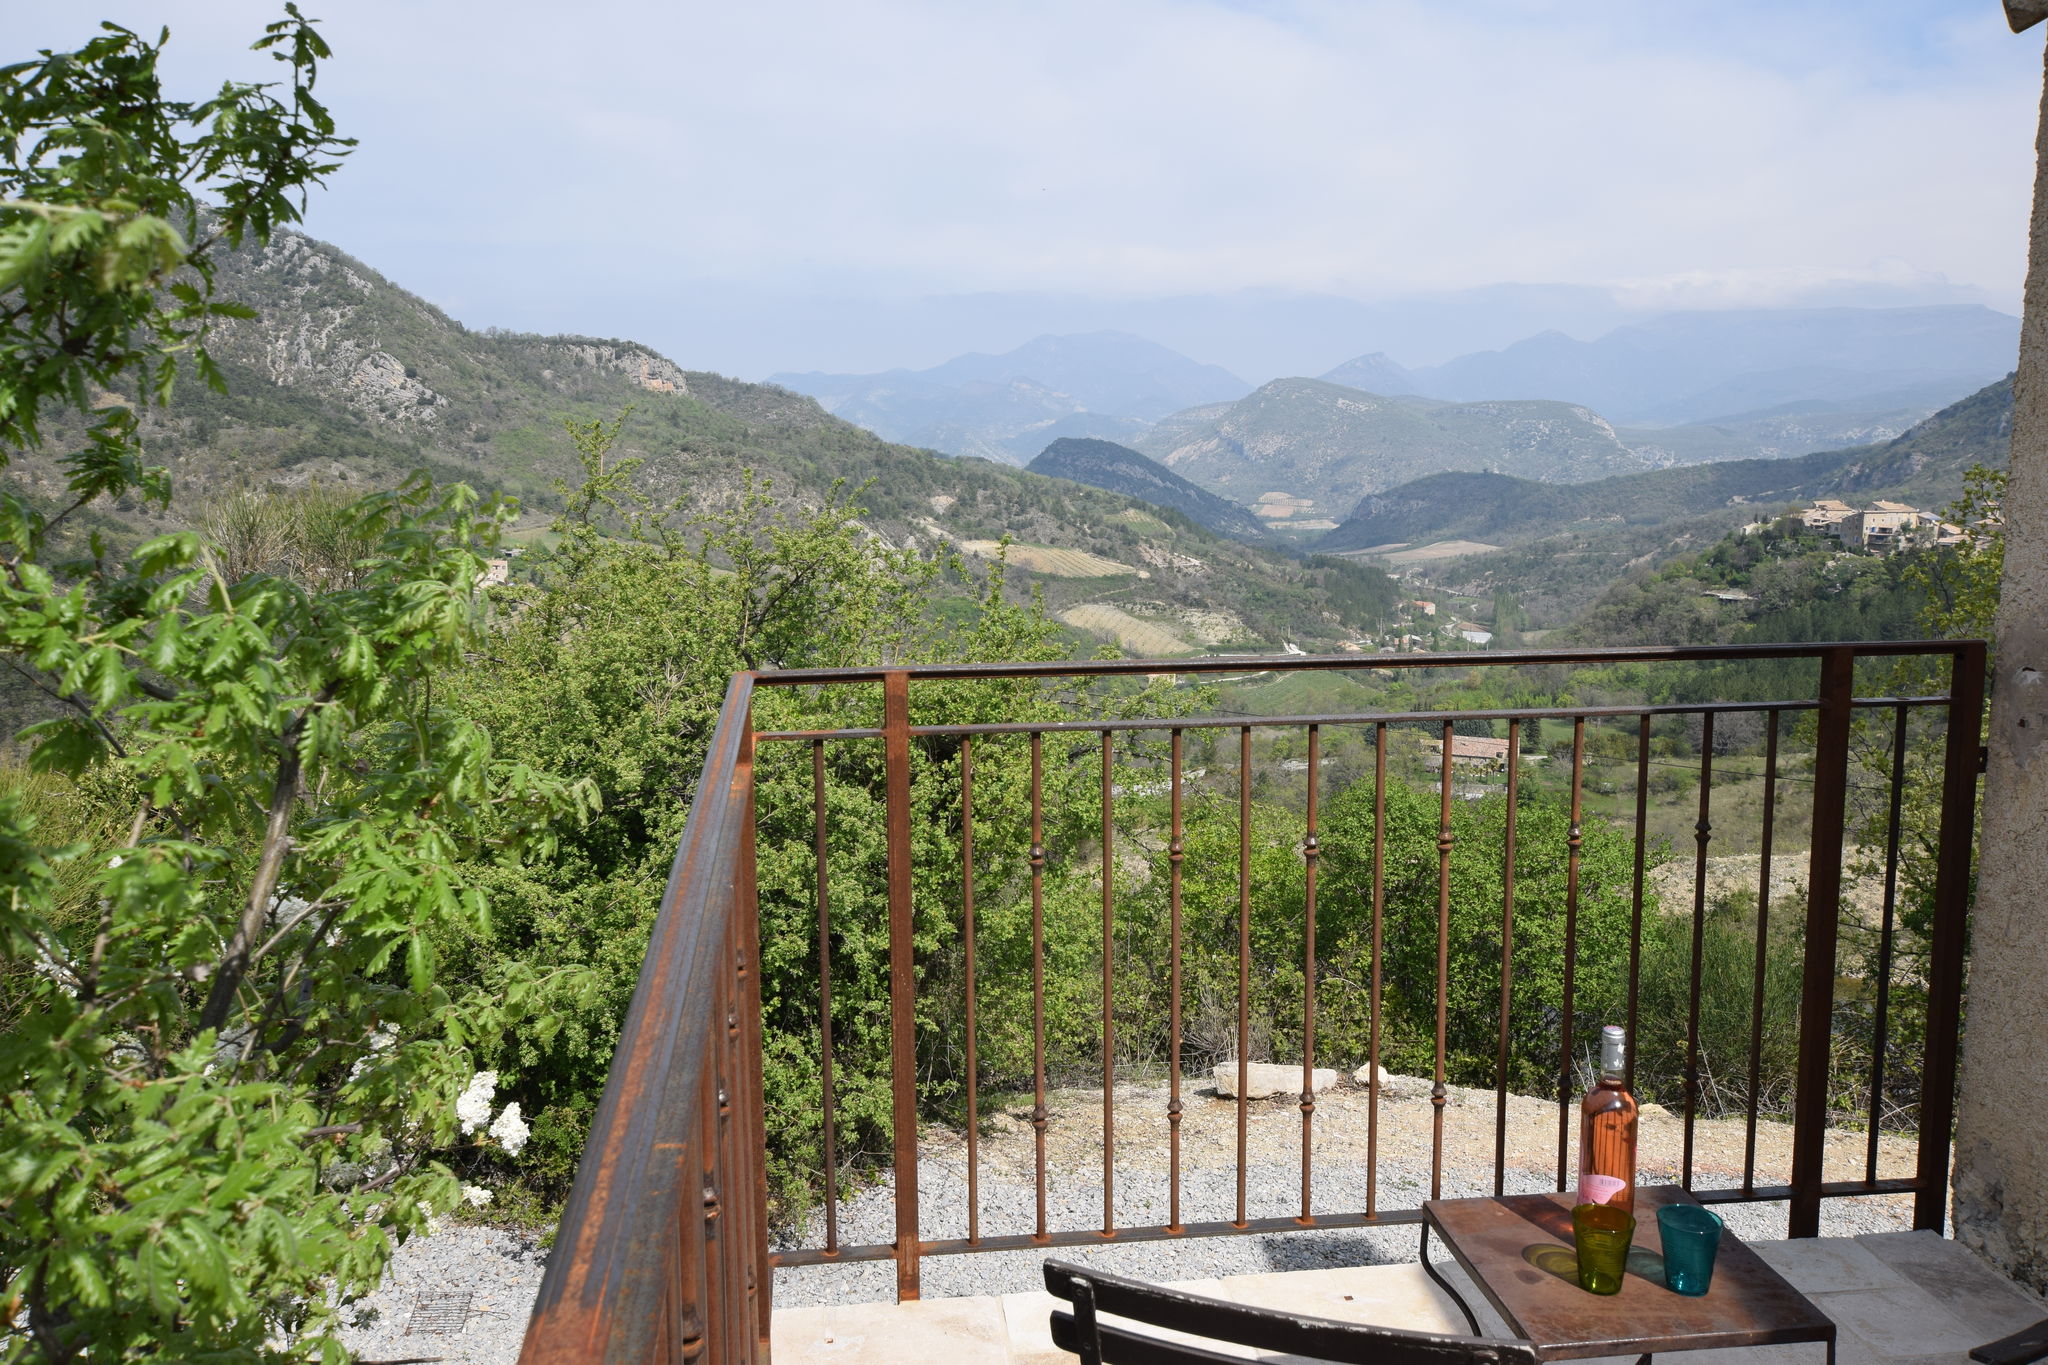 Holiday Home. Valley View. Private Pool. Boules Court. Roofed Terrace